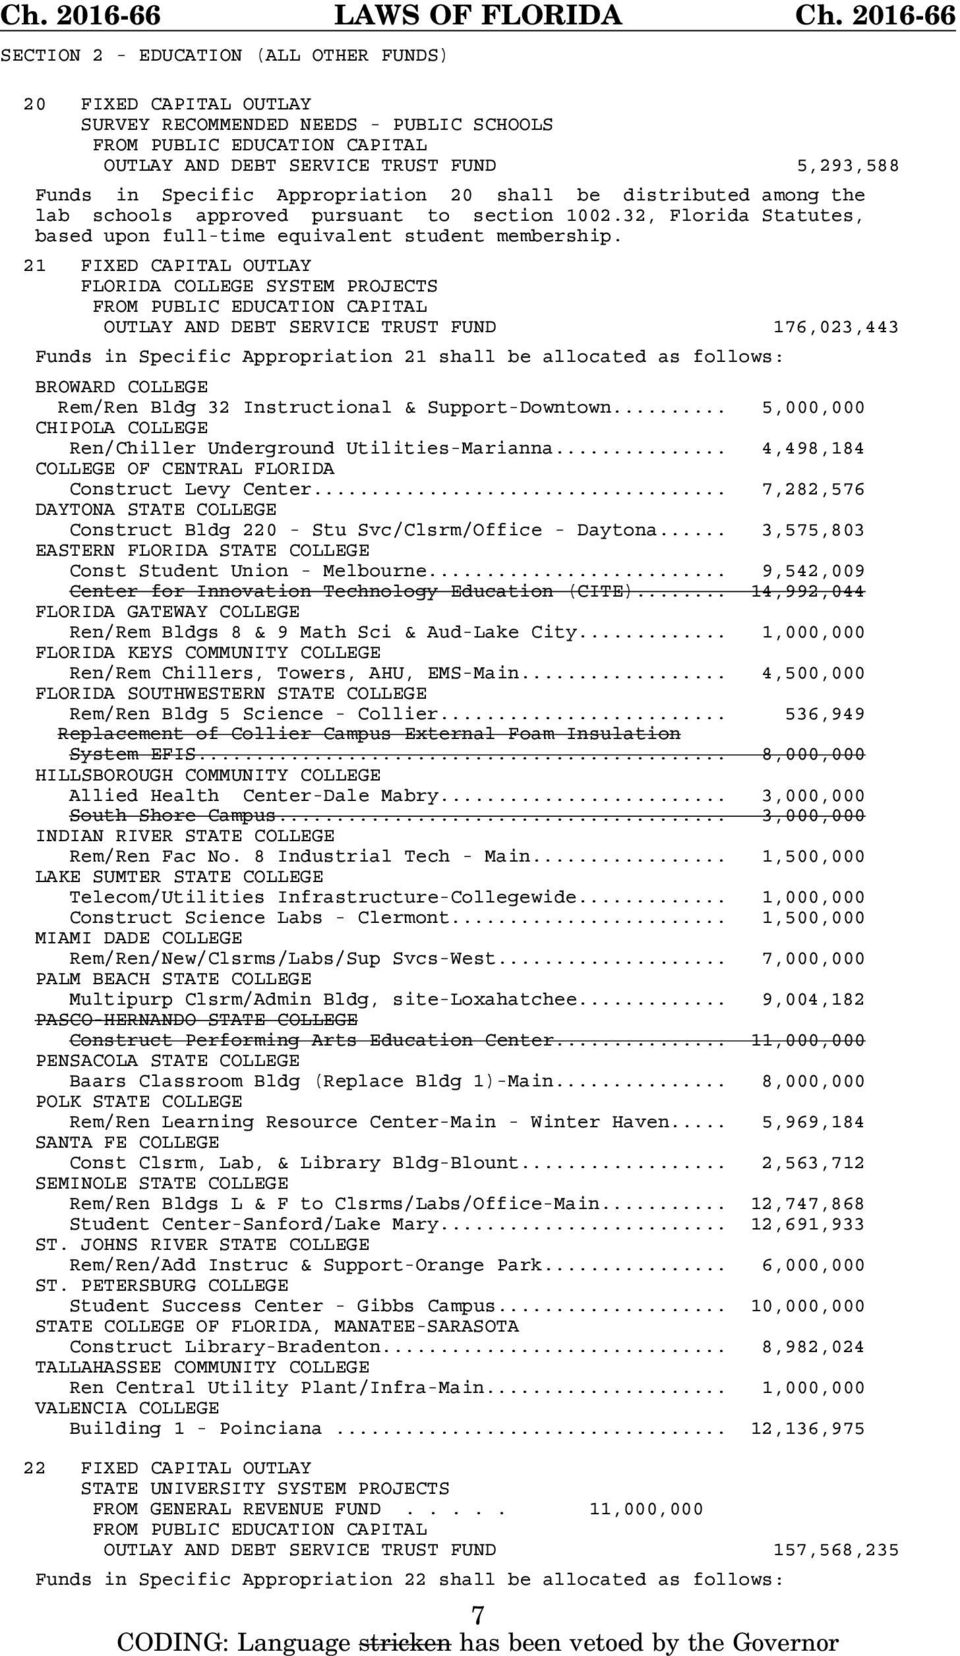 21 FIXED CAPITAL OUTLAY FLORIDA COLLEGE SYSTEM PROJECTS FROM PUBLIC EDUCATION CAPITAL OUTLAY AND DEBT SERVICE TRUST FUND 176,023,443 Funds in Specific Appropriation 21 shall be allocated as follows: